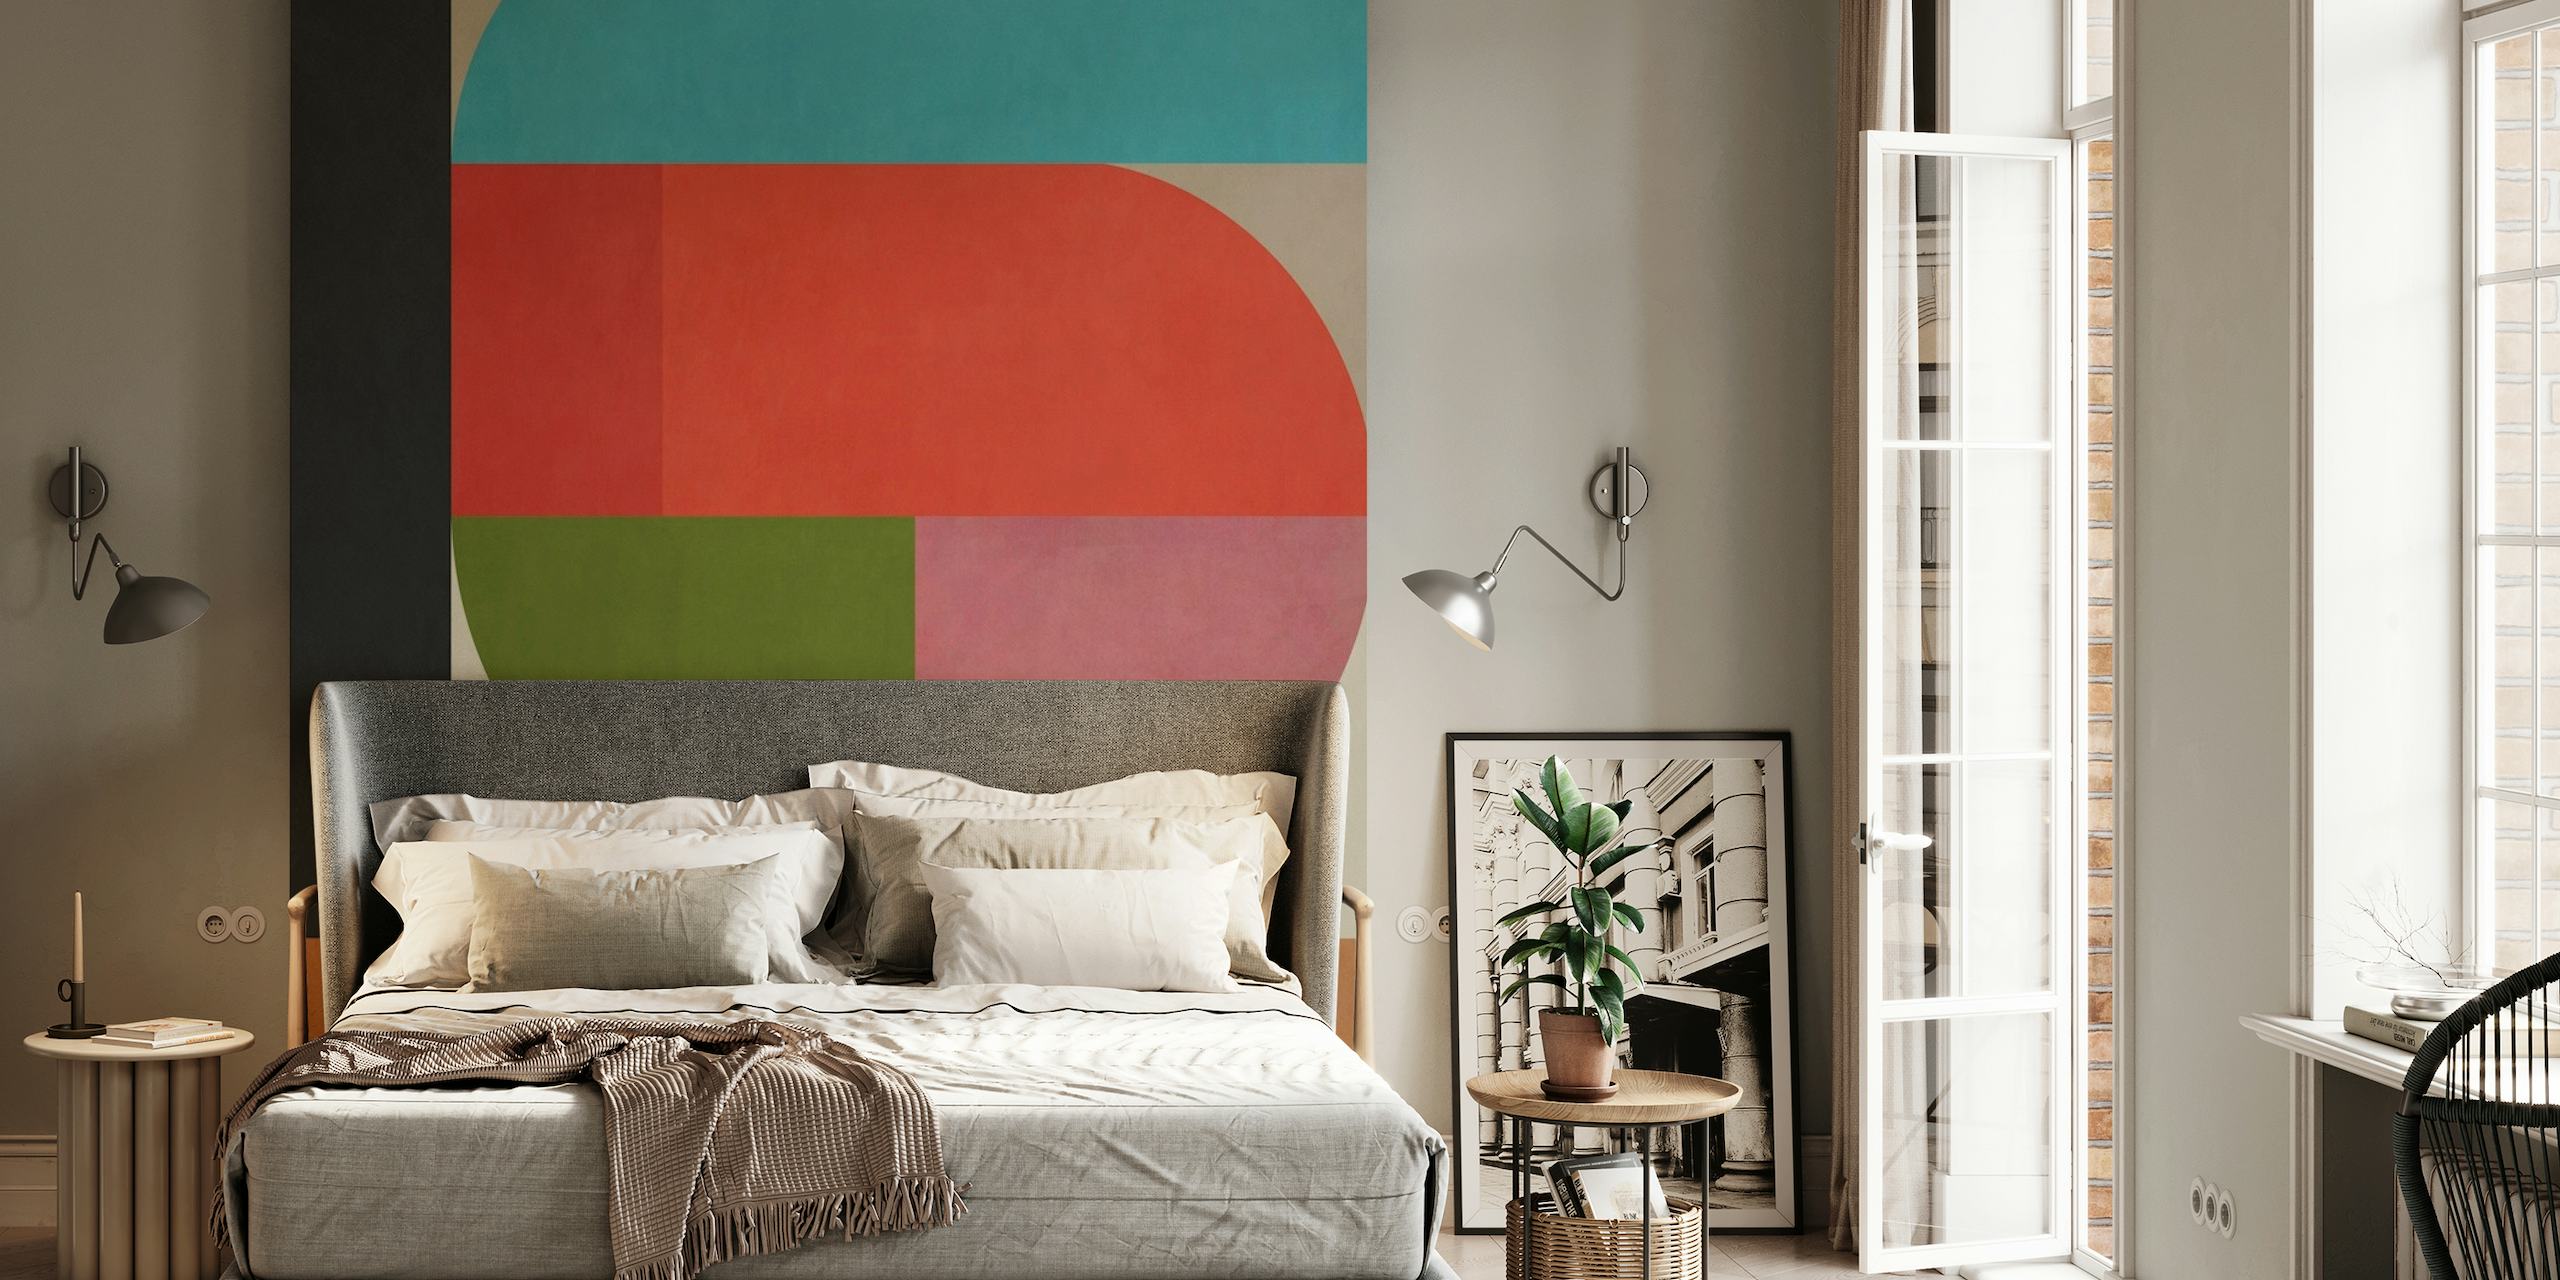 Abstract geometric wall mural in vibrant colors